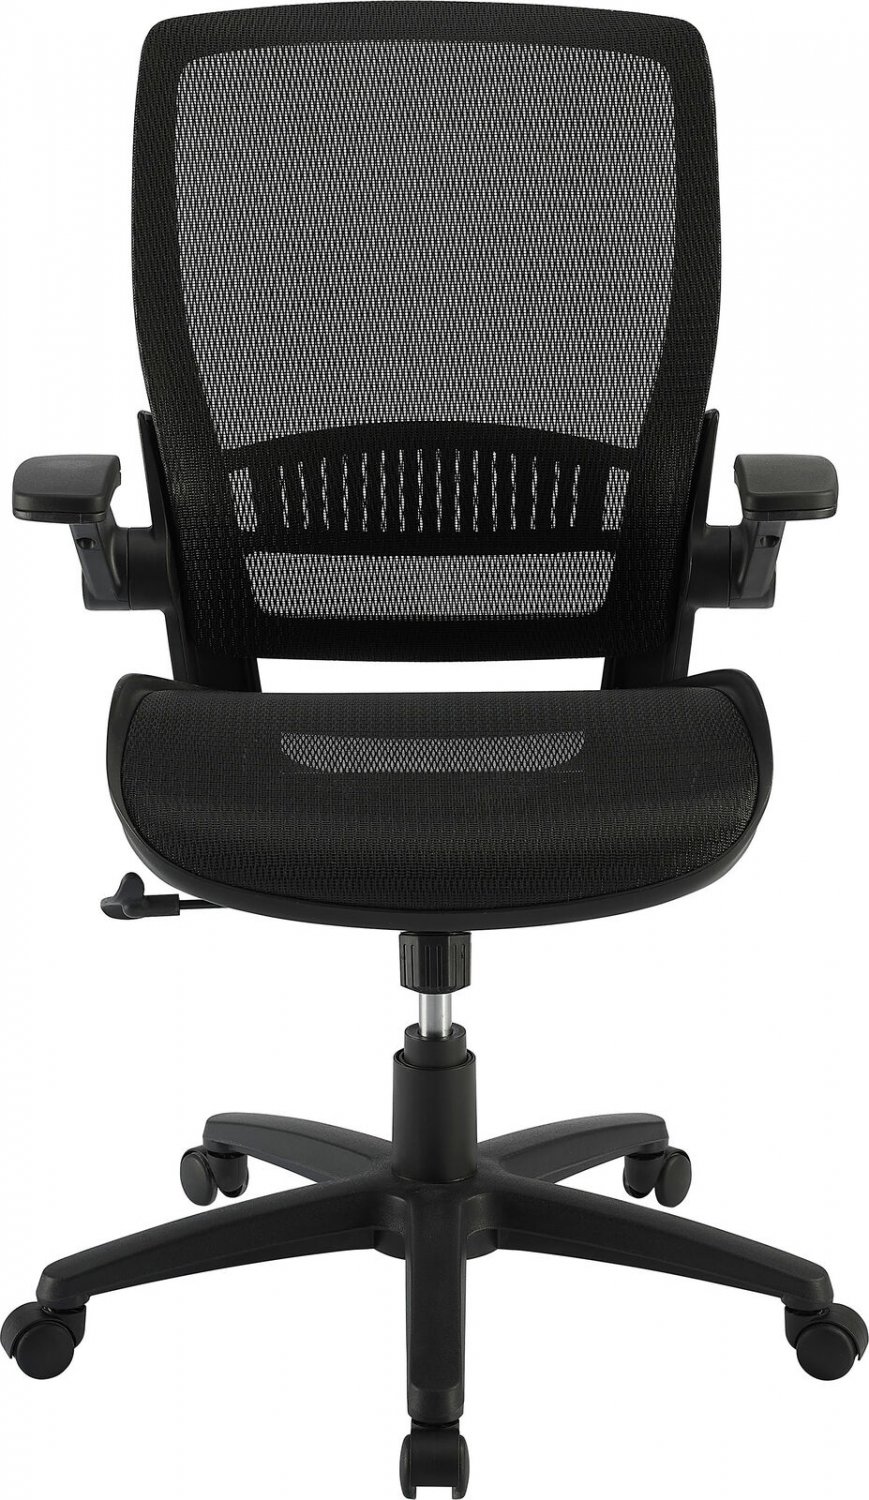 Insignia- Ergonomic Mesh Office Chair with Adjustable Arms - Black